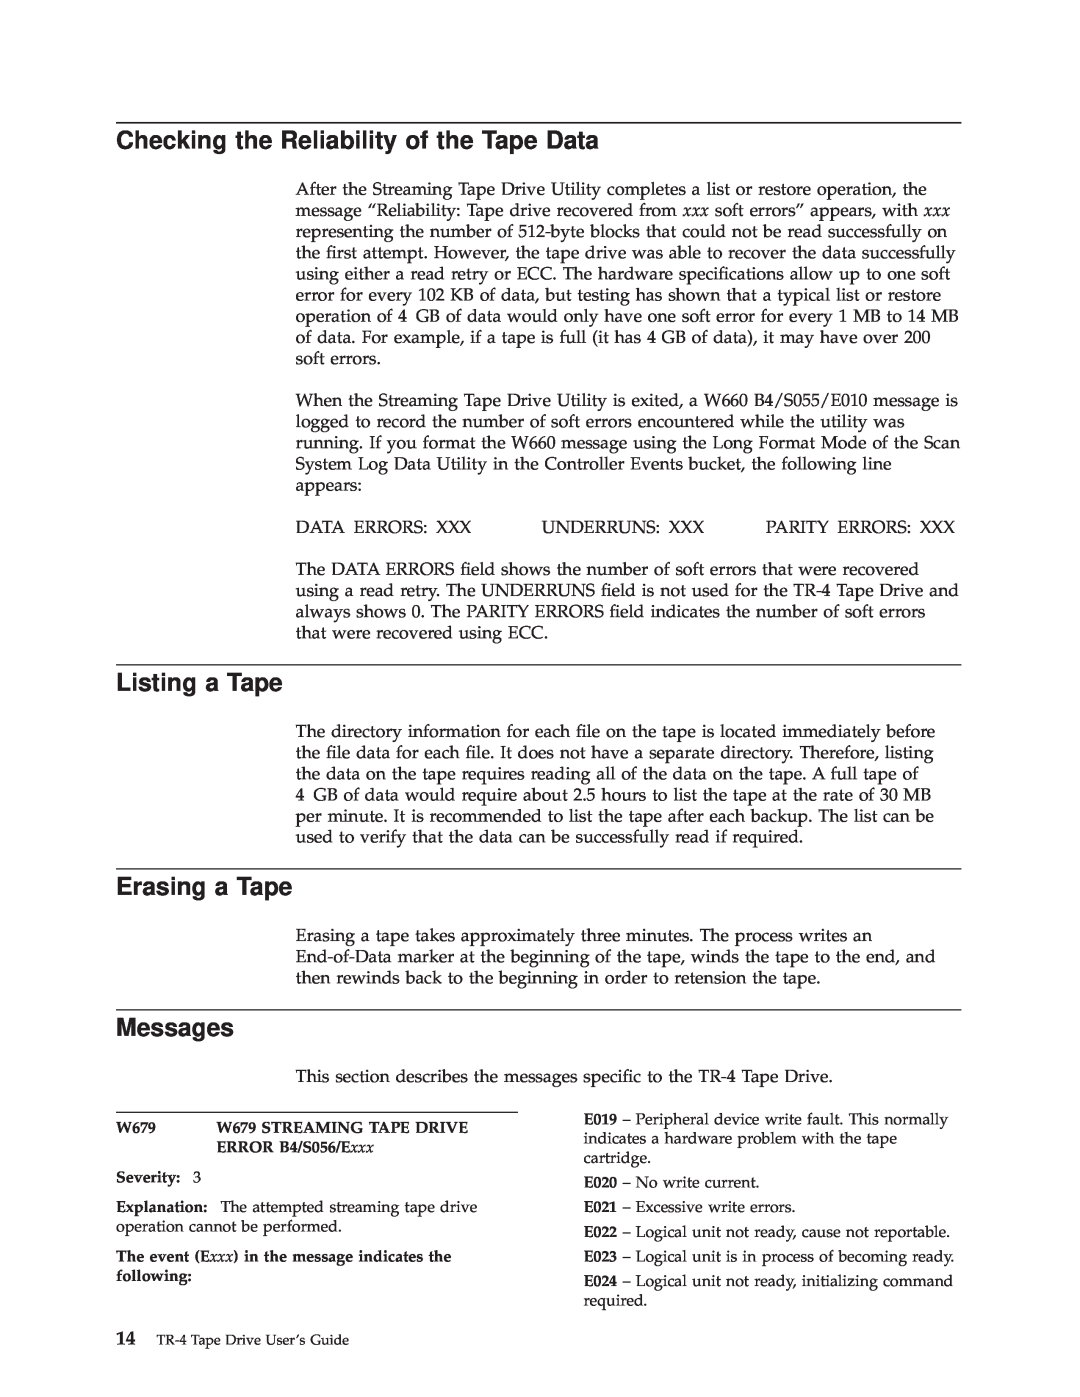 IBM 4690 manual Checking the Reliability of the Tape Data, Listing a Tape, Erasing a Tape, Messages 